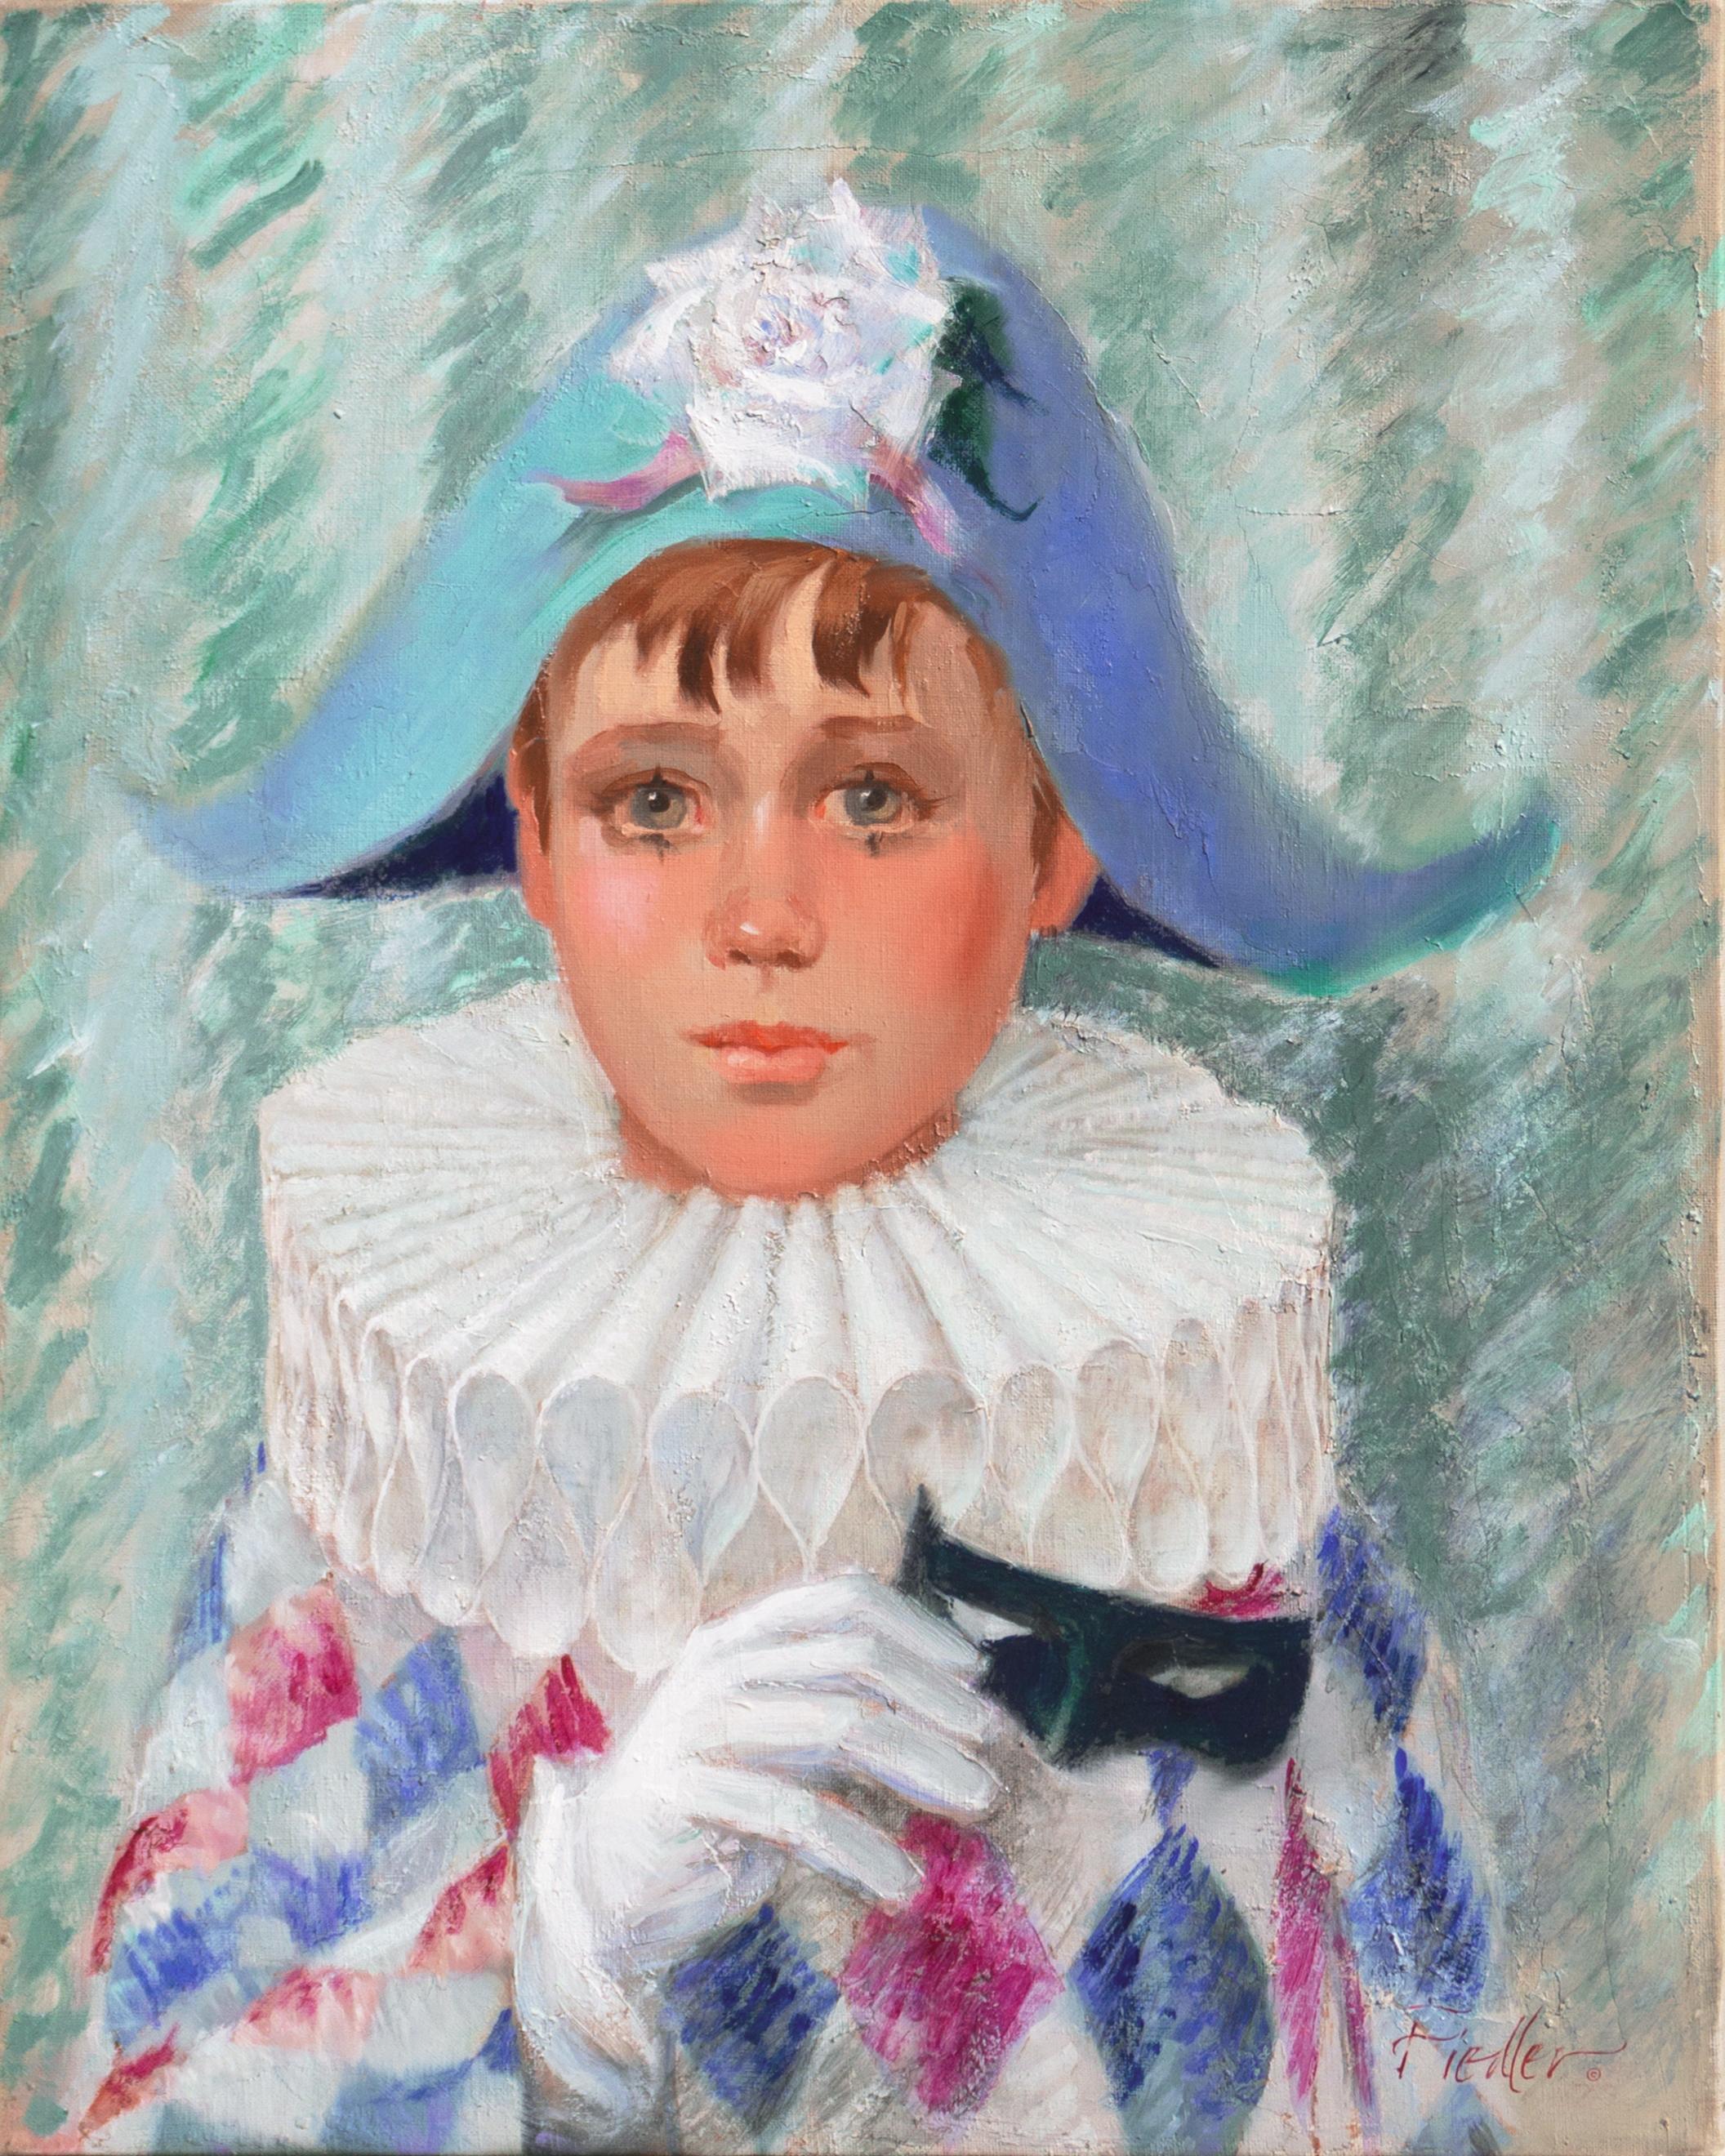  'Young Pierrot', Arlequino, Harlequin, Costume Party, Fancy Dress Ball